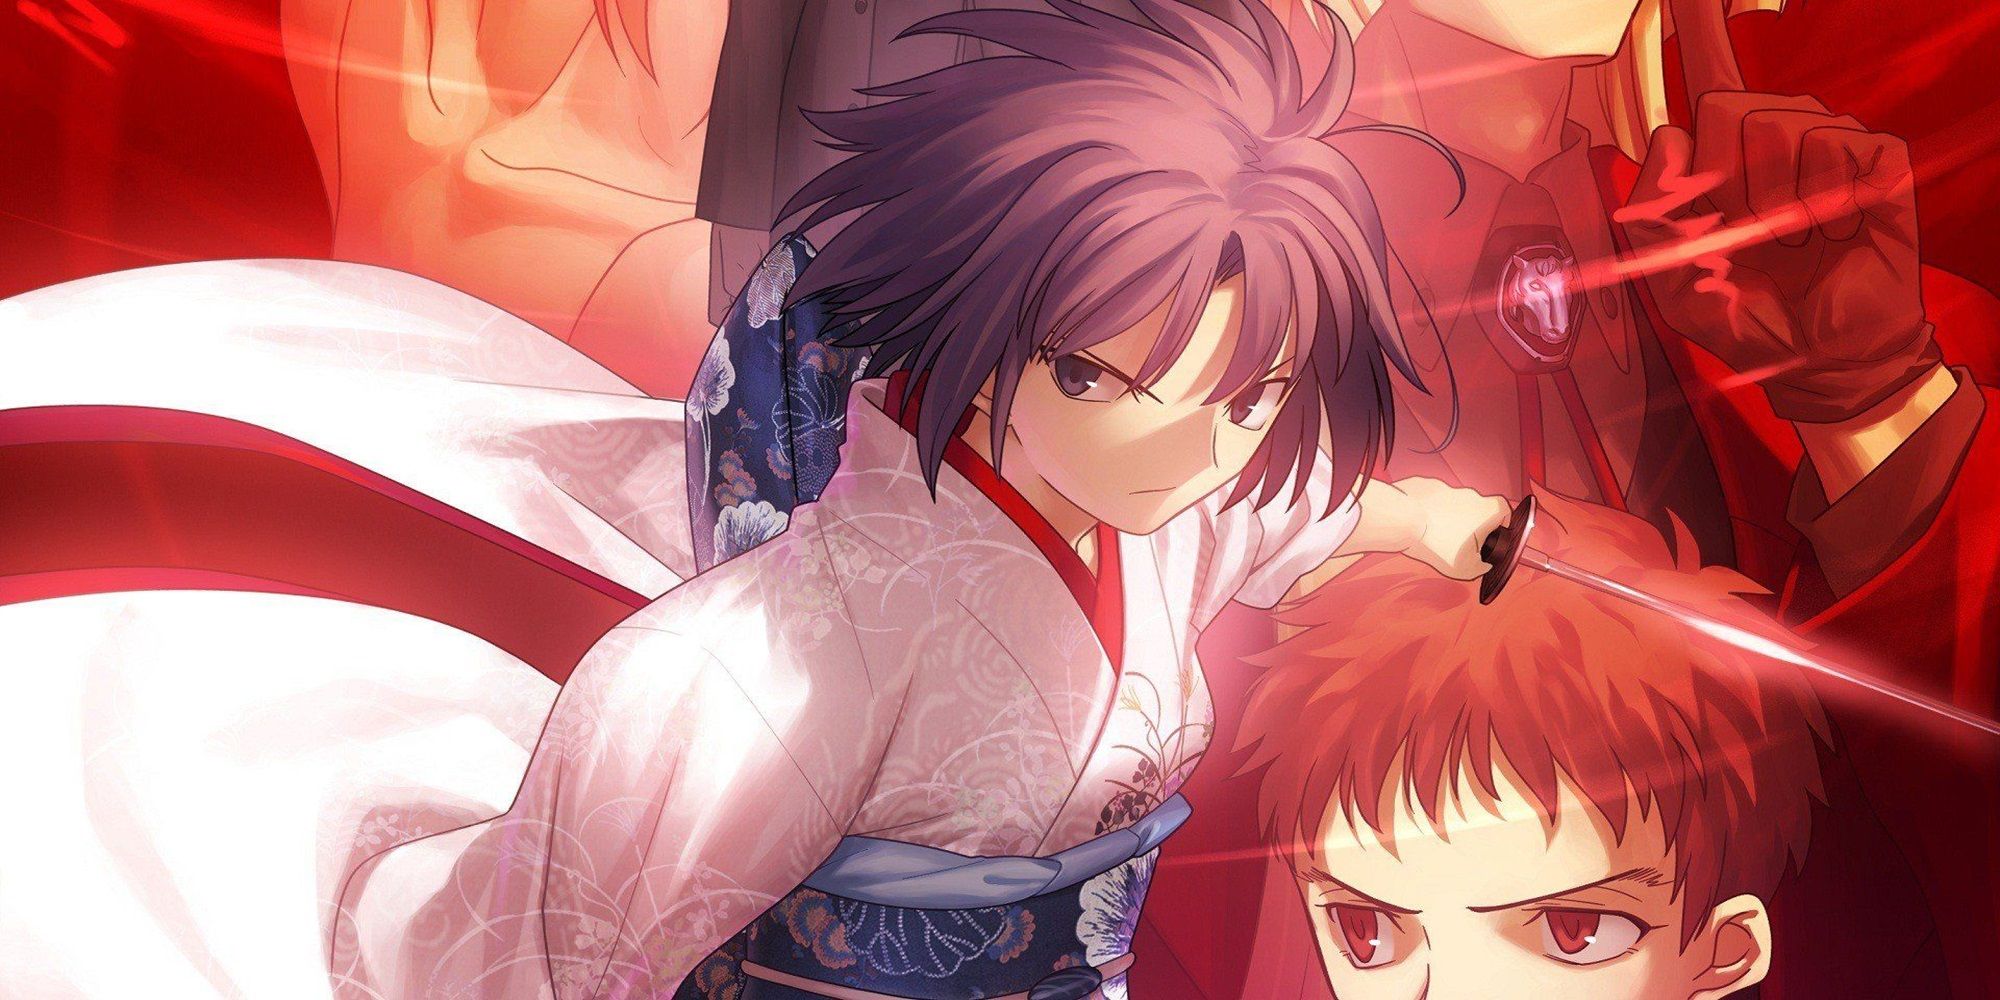 Paradox Spiral key visual by Type-Moon depicting official artwork of the main charactr holding a sword in the foreground, with a red collage of other characters behind her.